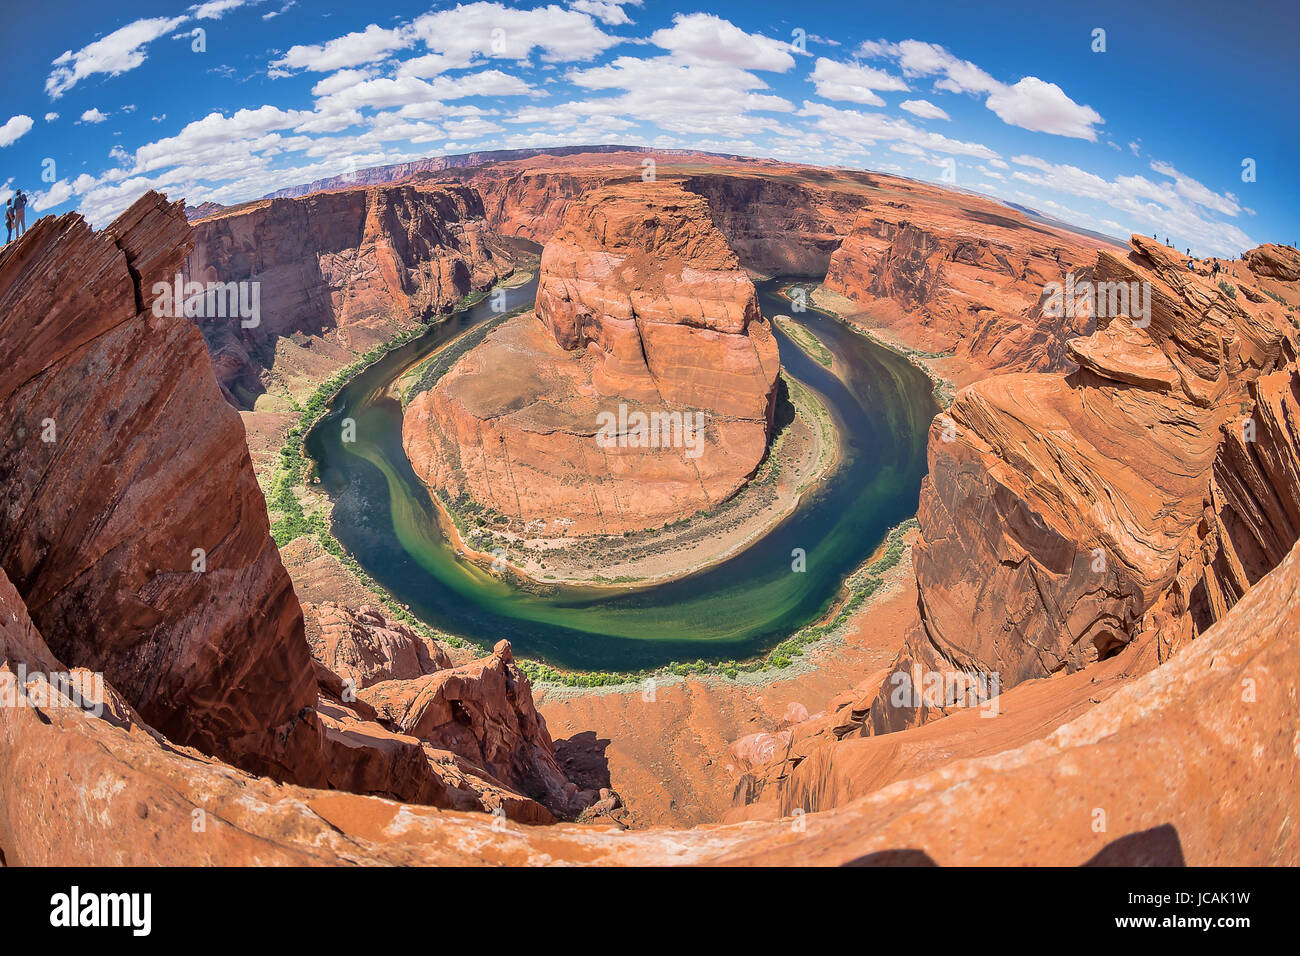 Horseshoe Bend seen from the lookout point, Glen Canyon National ...